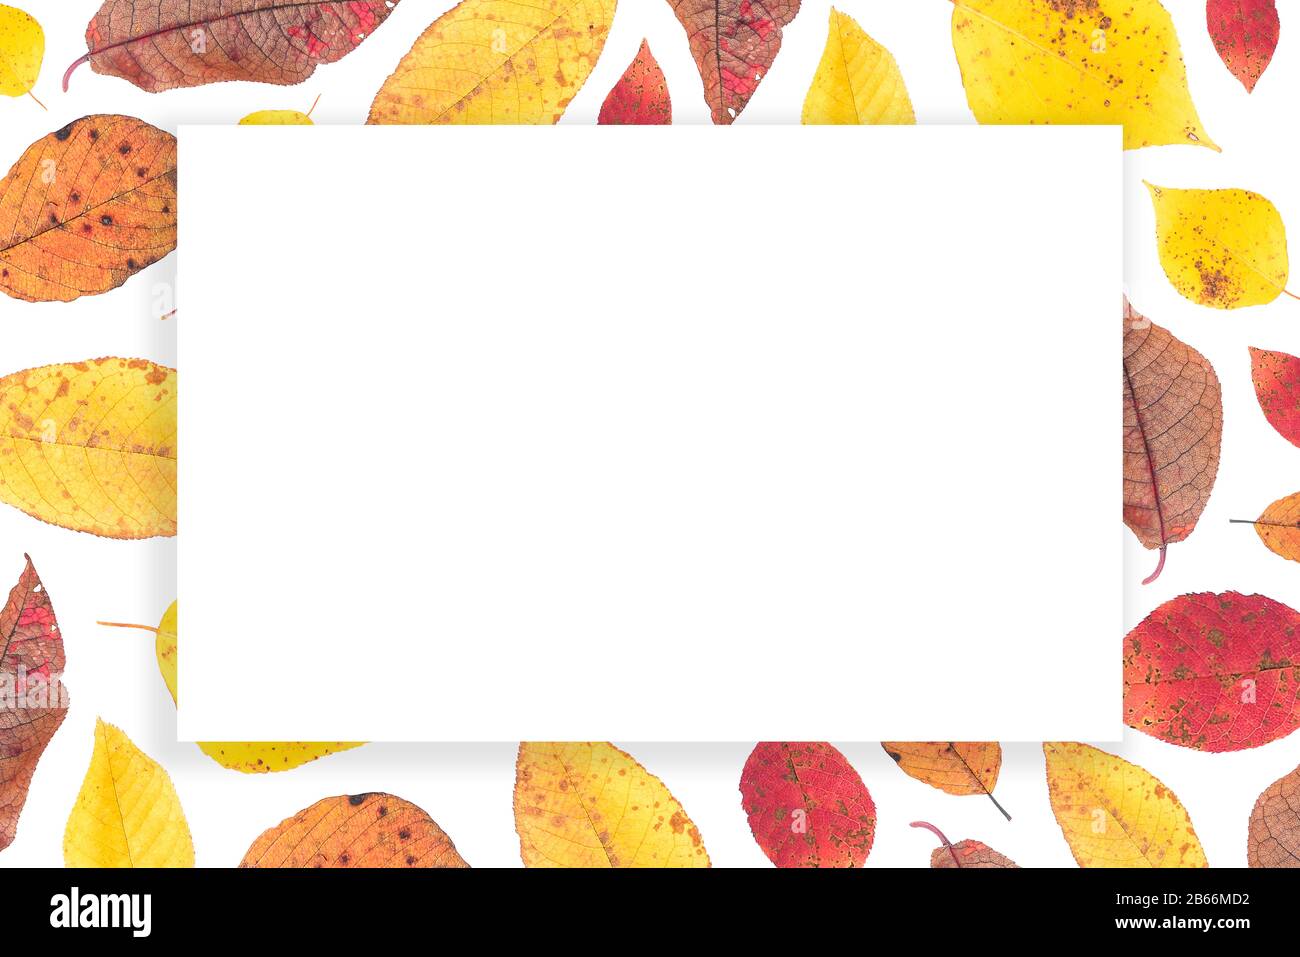 Autumn leaves with a white frame for text. Colorful leaves of golden, red and cinnamon color Stock Photo